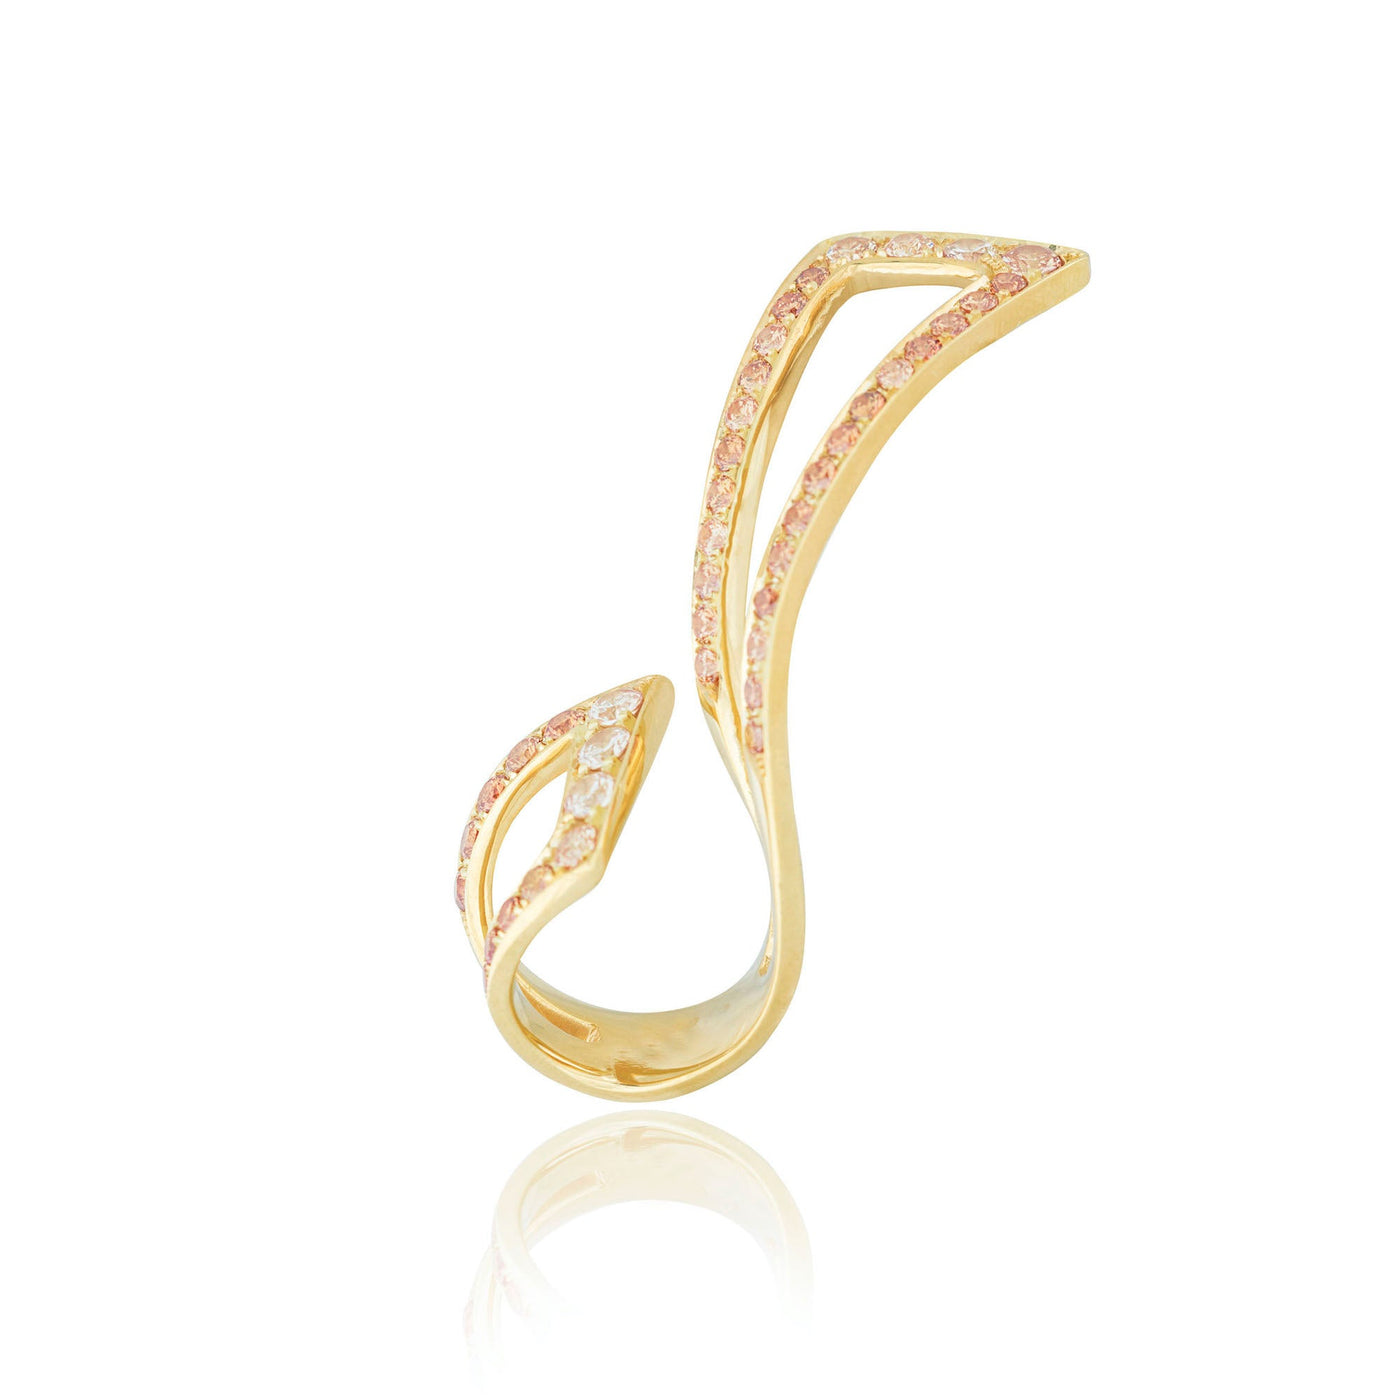 Gold cocktail ring with white and champagne diamonds from Atelier ORMAN